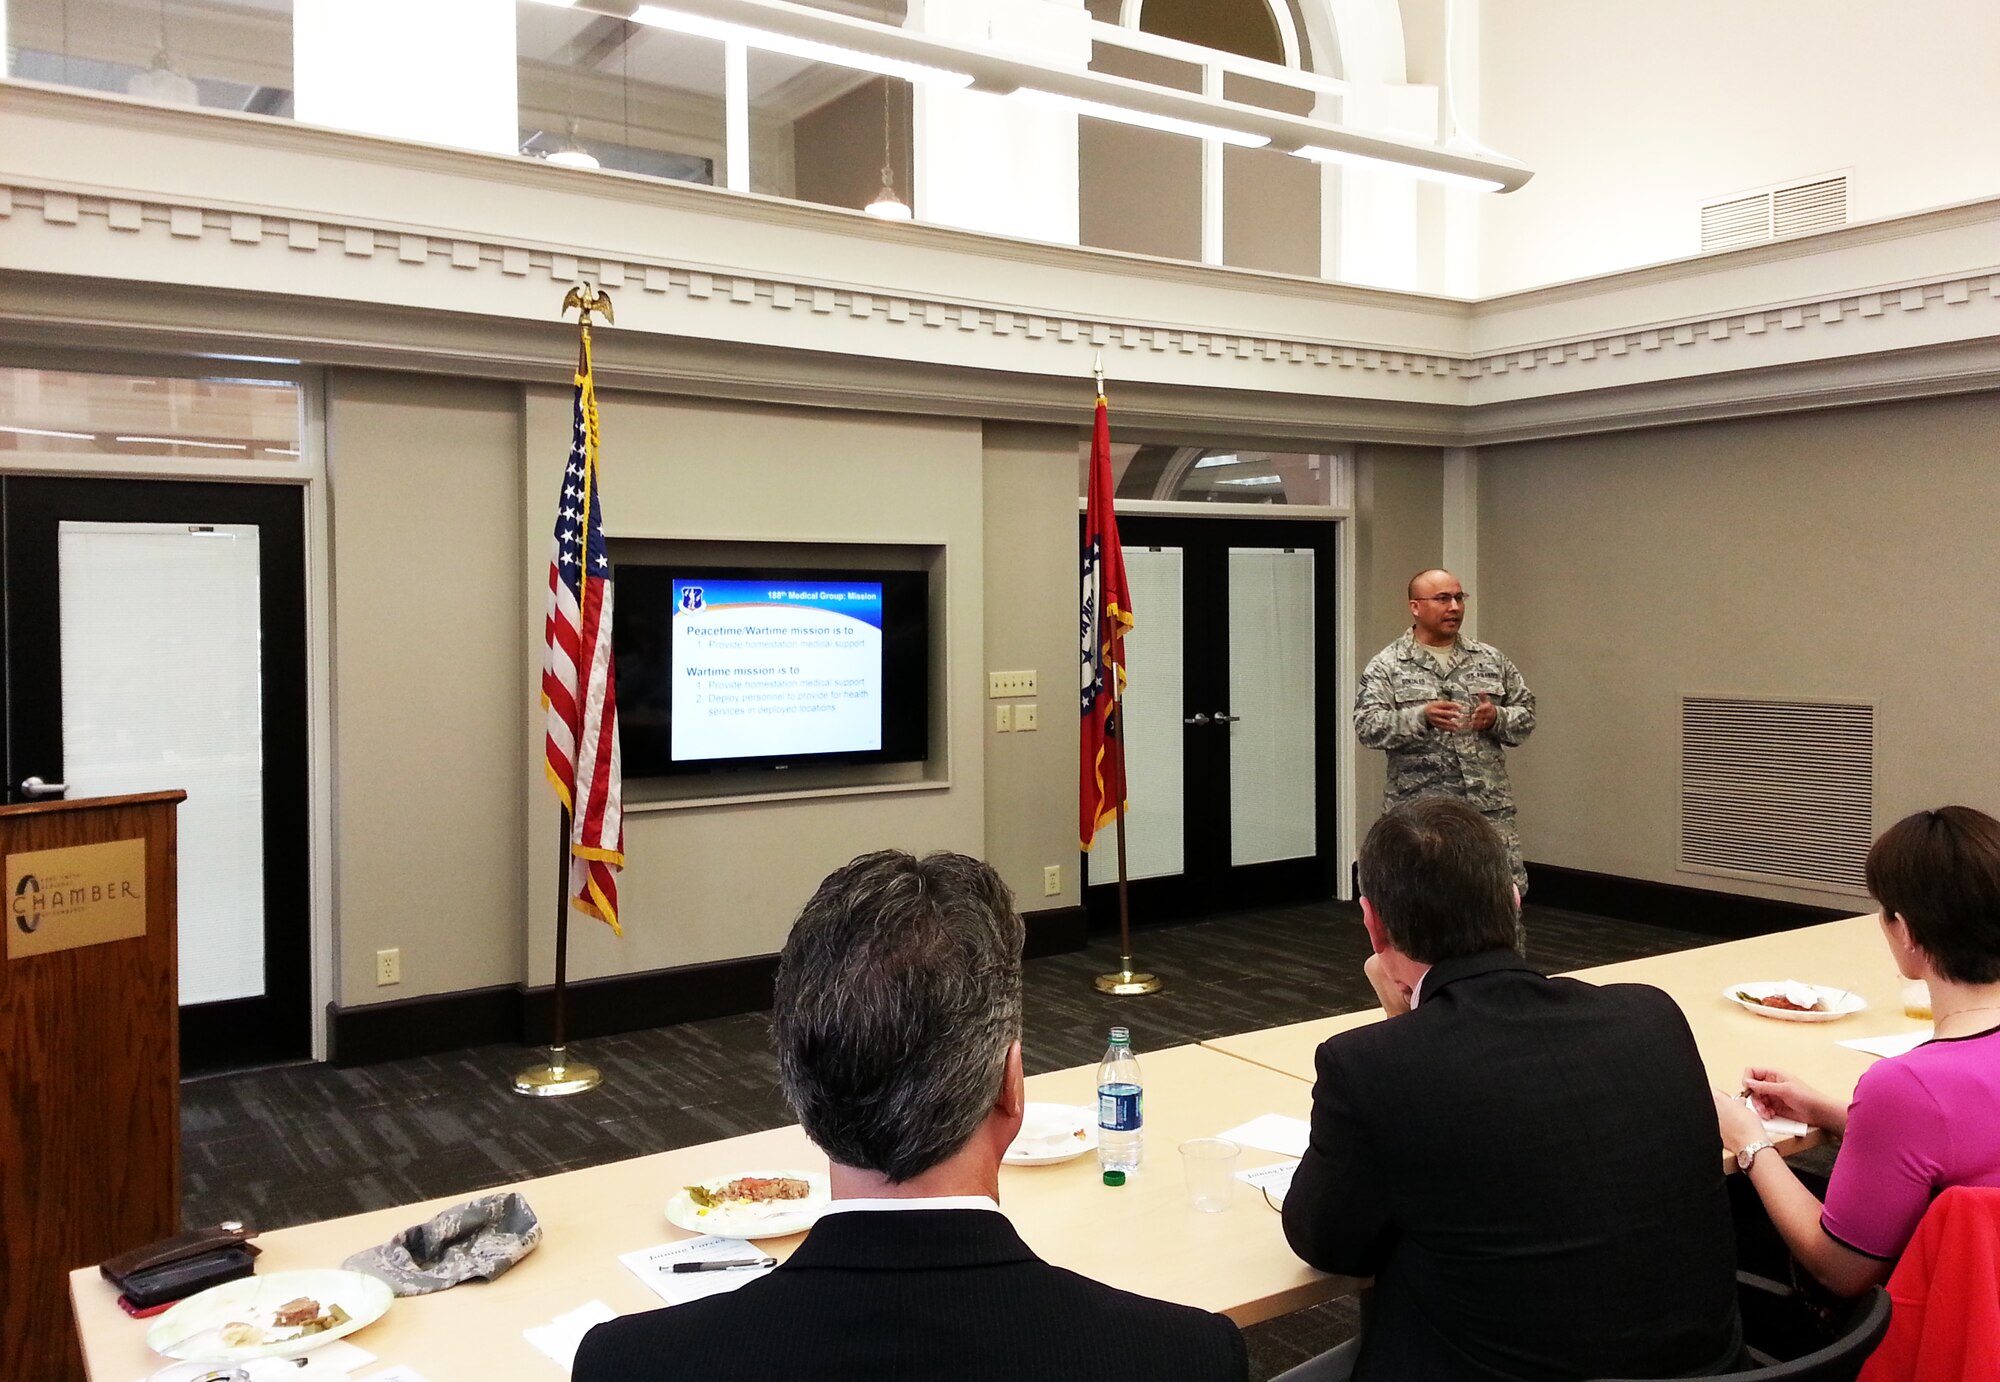 Chief Master Sgt. Juan Gonzales, 188th Medical Group, speaks to area company human resource professionals at the Fort Smith Regional Chamber of Commerce March 10. The objective of the meeting was to educate local companies on a partnership initiative between the 188th and the Chamber of Commerce. The strategy focuses on linking drill-status Guardsmen with full-time employment opportunities in the River Valley. The meeting educated local employers on specific training and education 188th members receive and how those specialties can benefit the local civilian workforce. (U.S. Air National Guard photo by Maj. Heath Allen/Released)